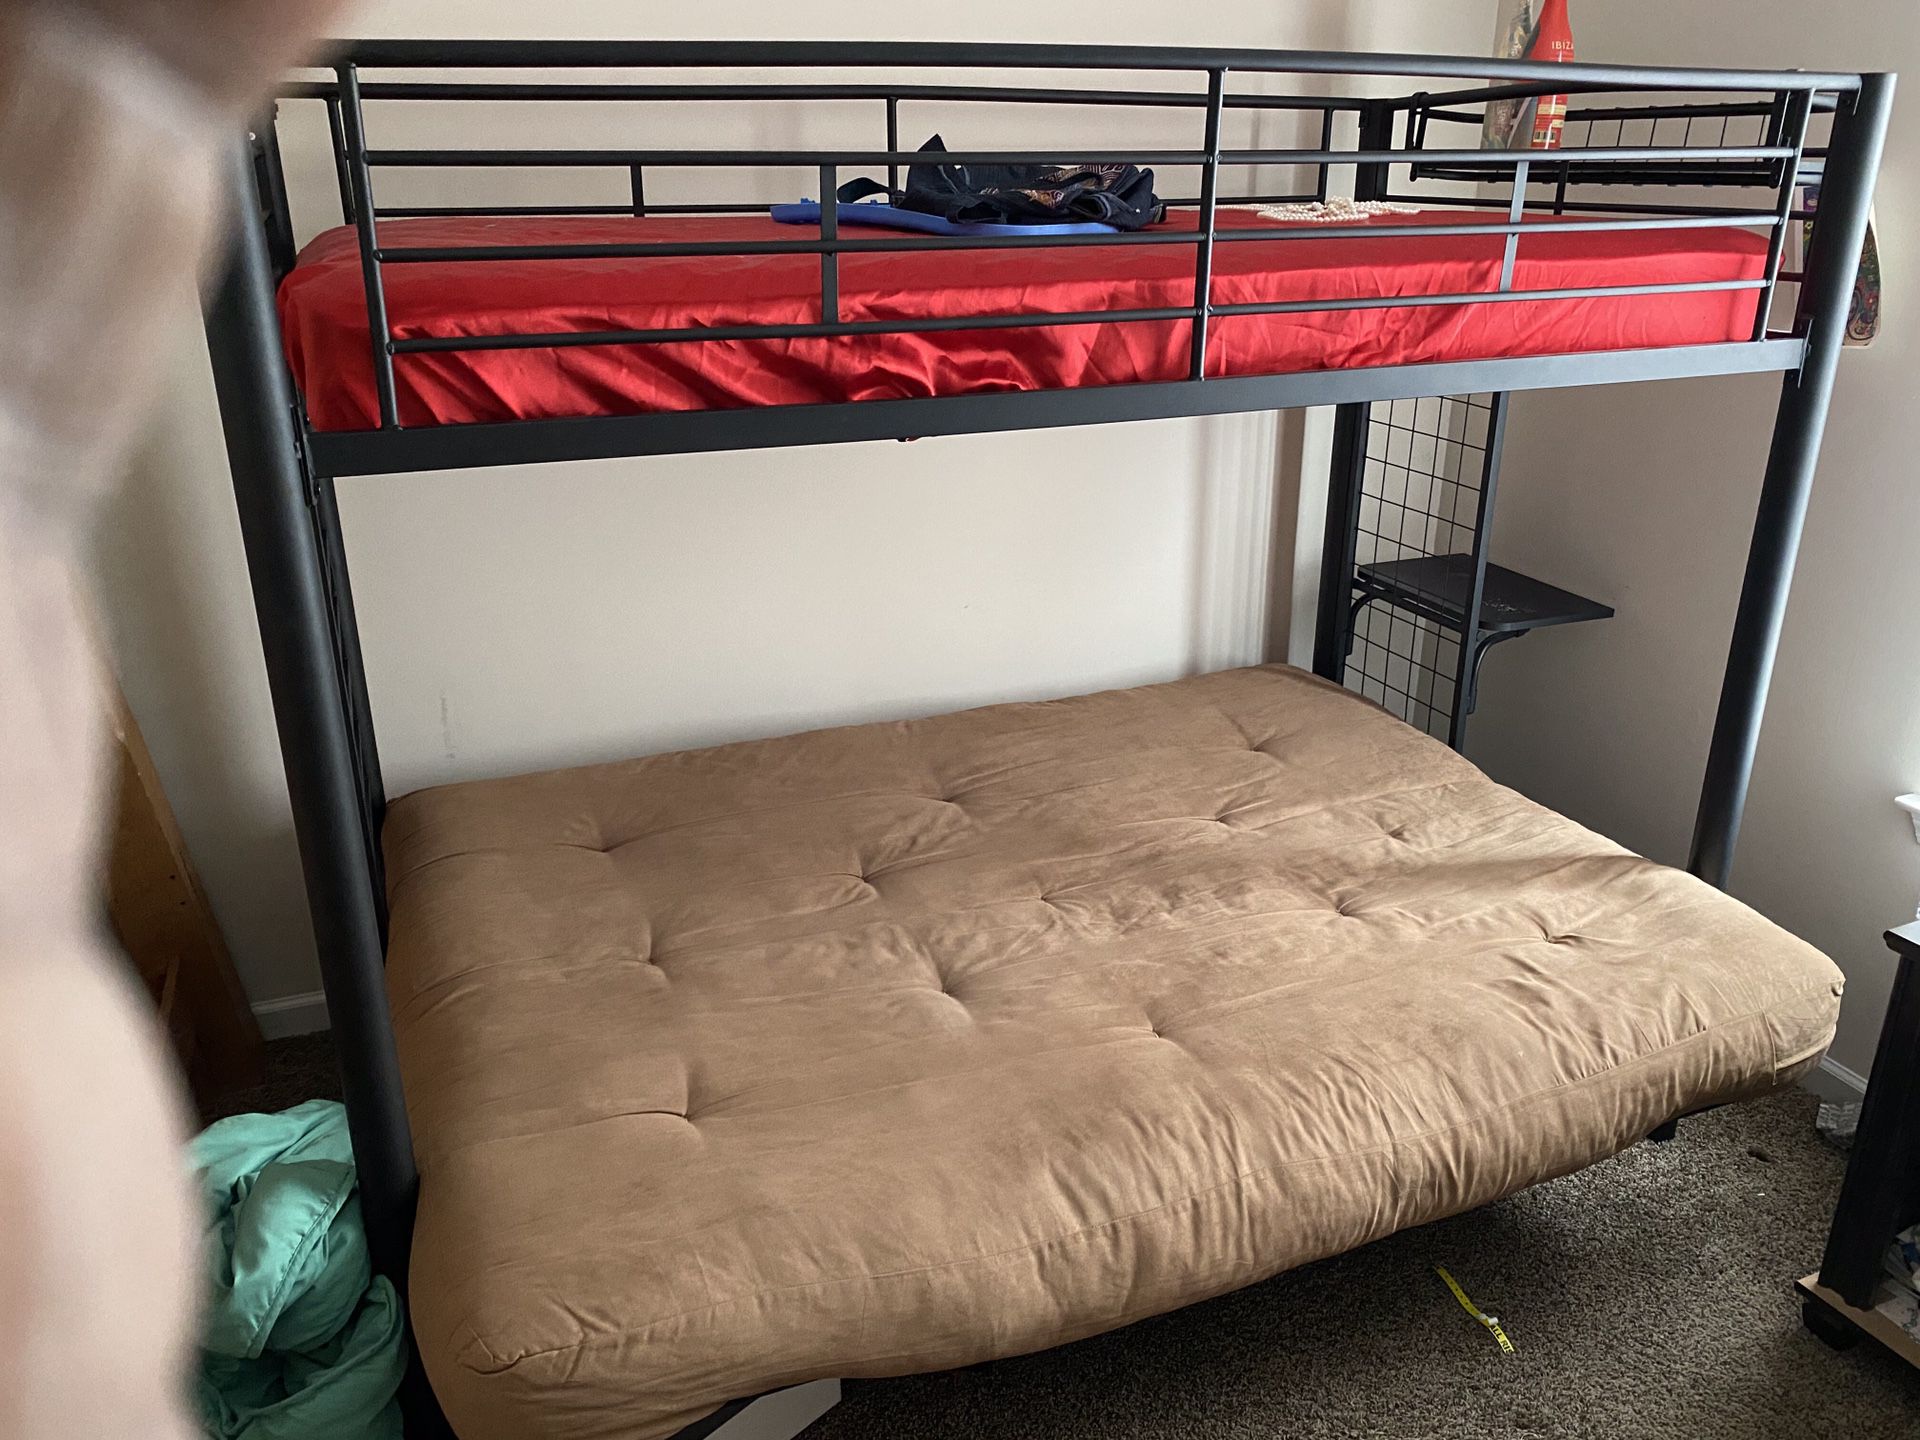 Rarely used Bunk Bed Futon Bottom